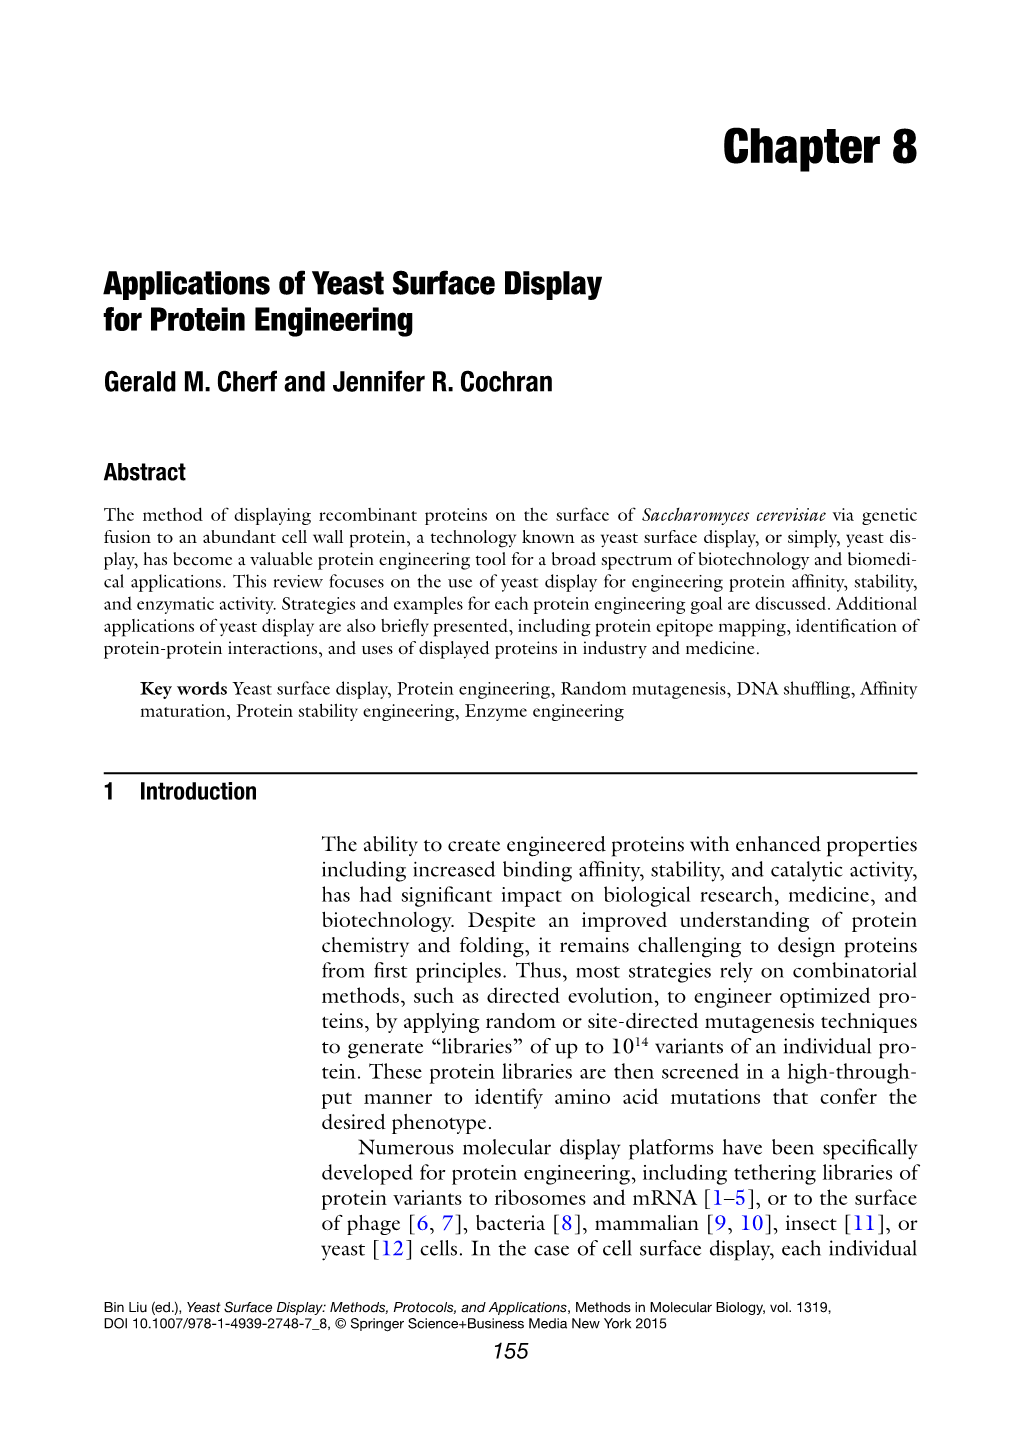 Applications of Yeast Surface Display for Protein Engineering